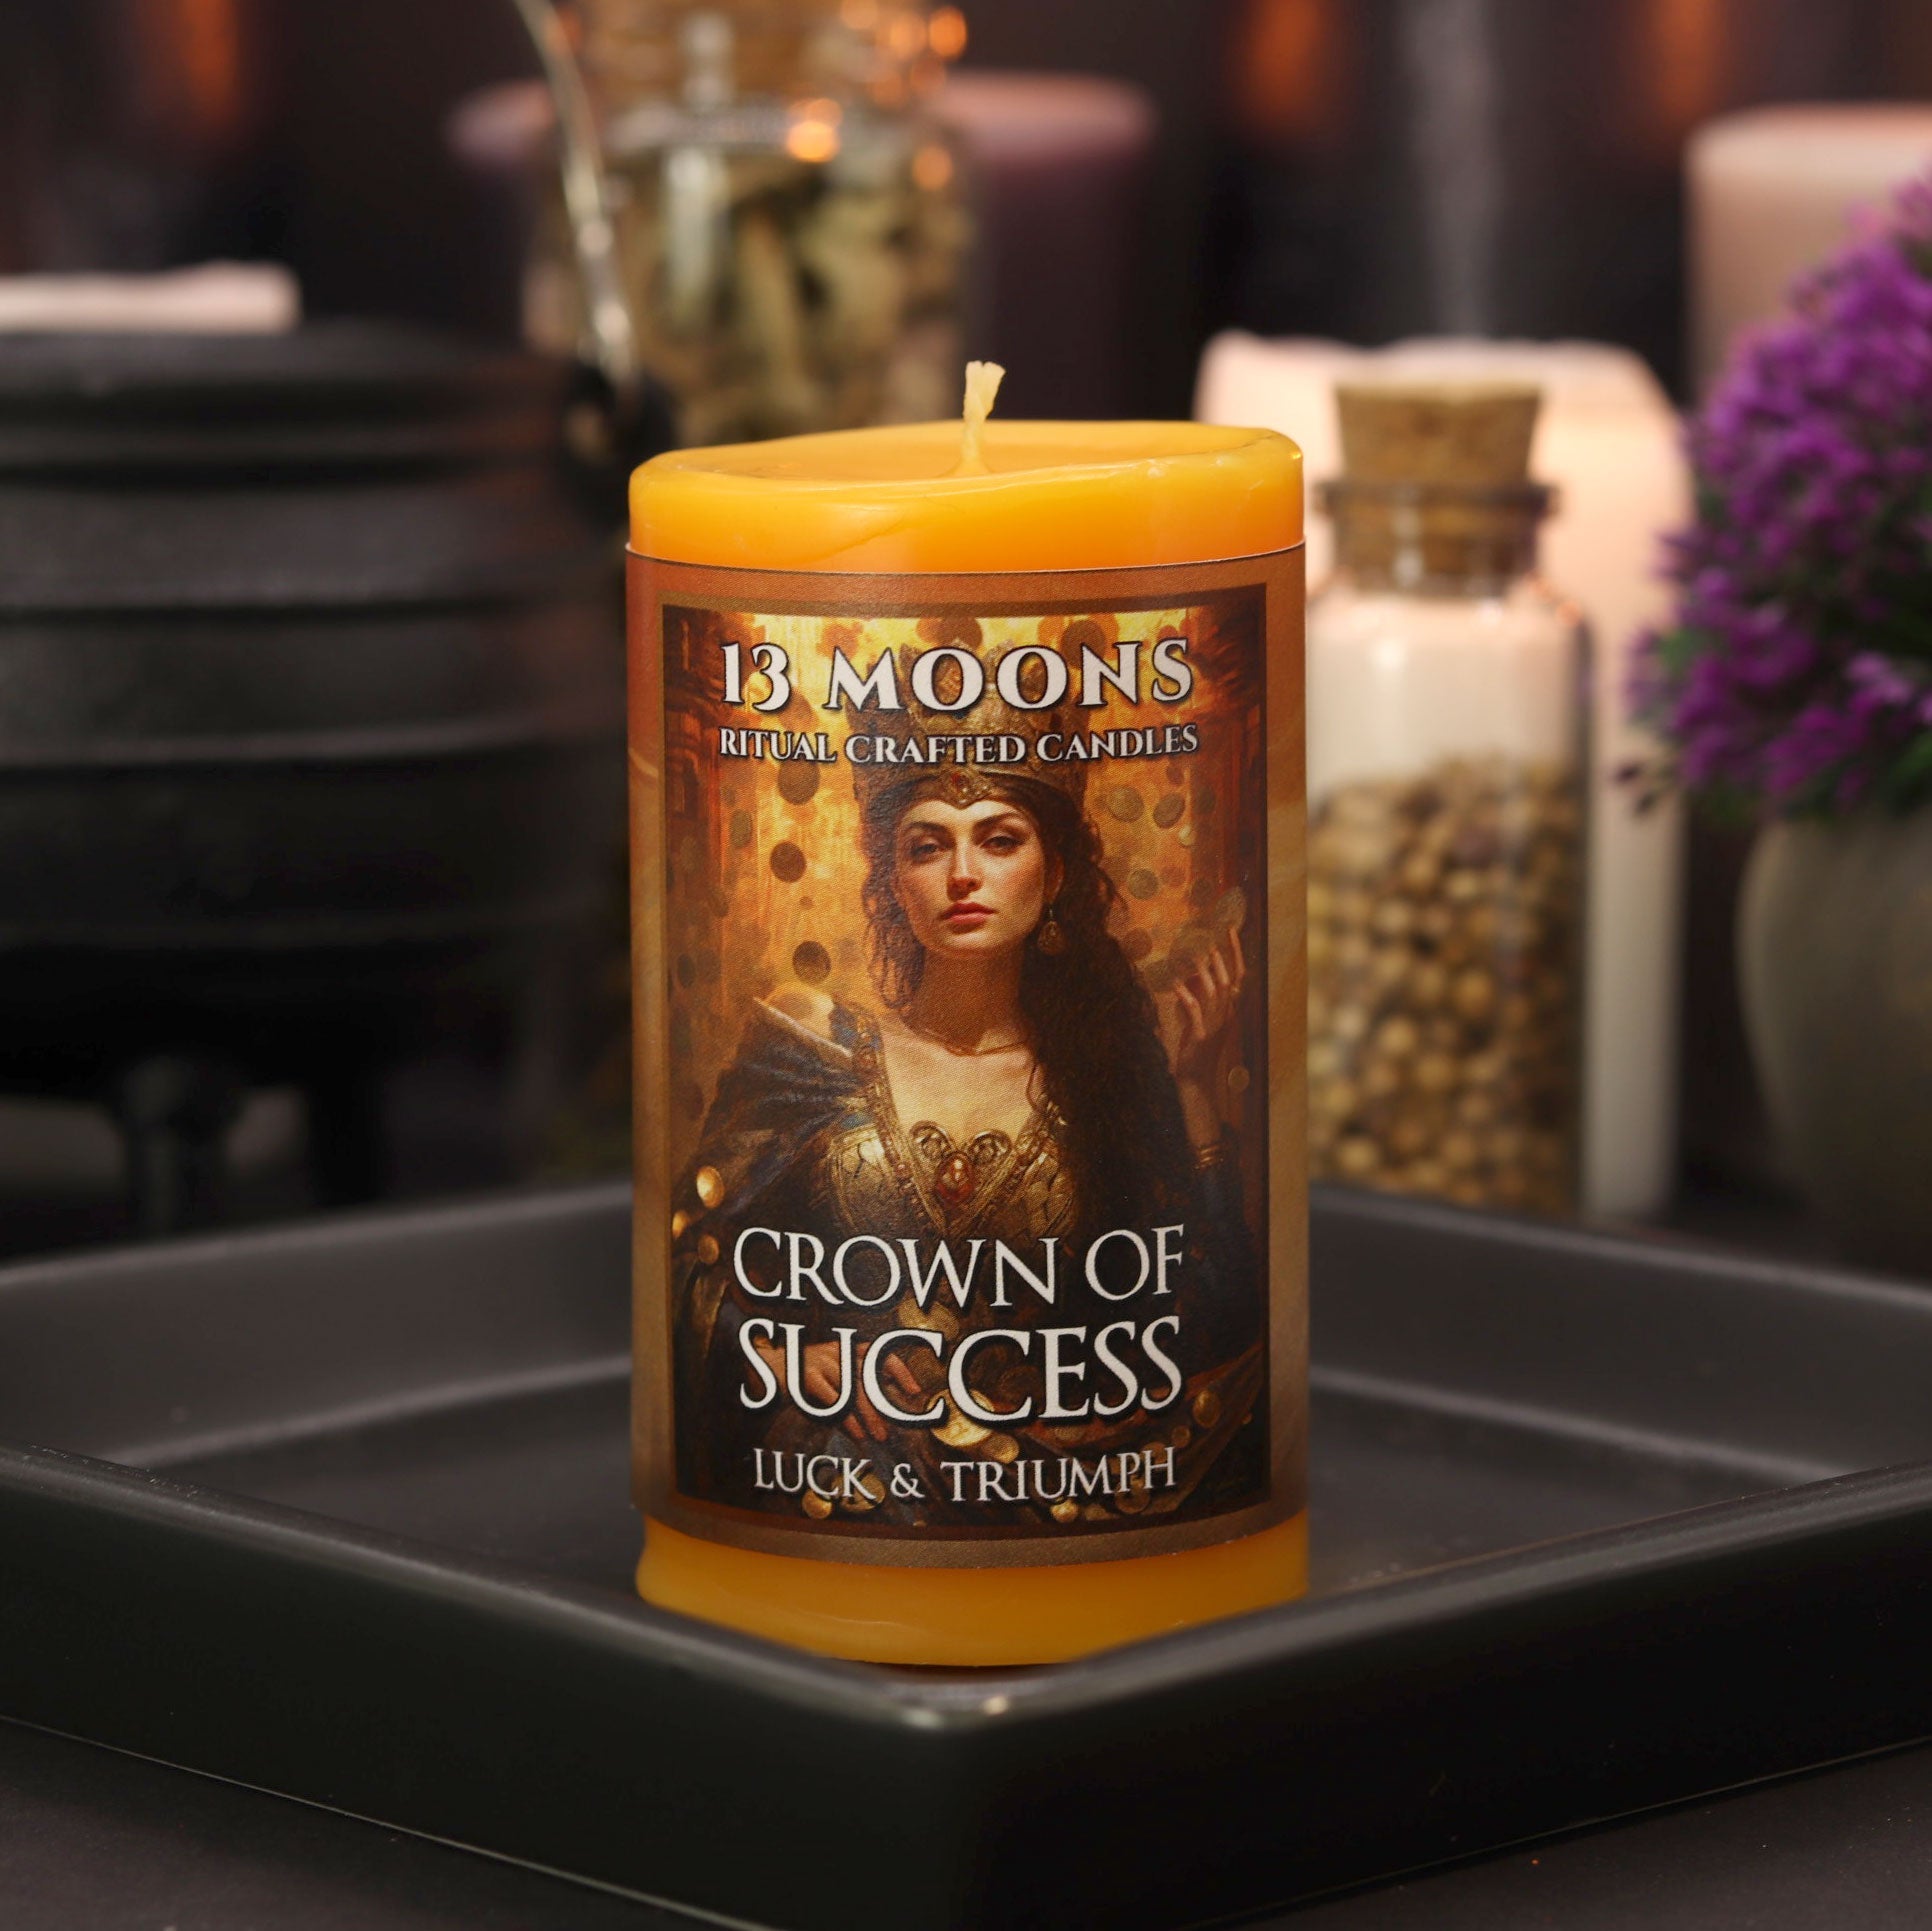 Crown of Success Candle Small Pillar - 13 Moons